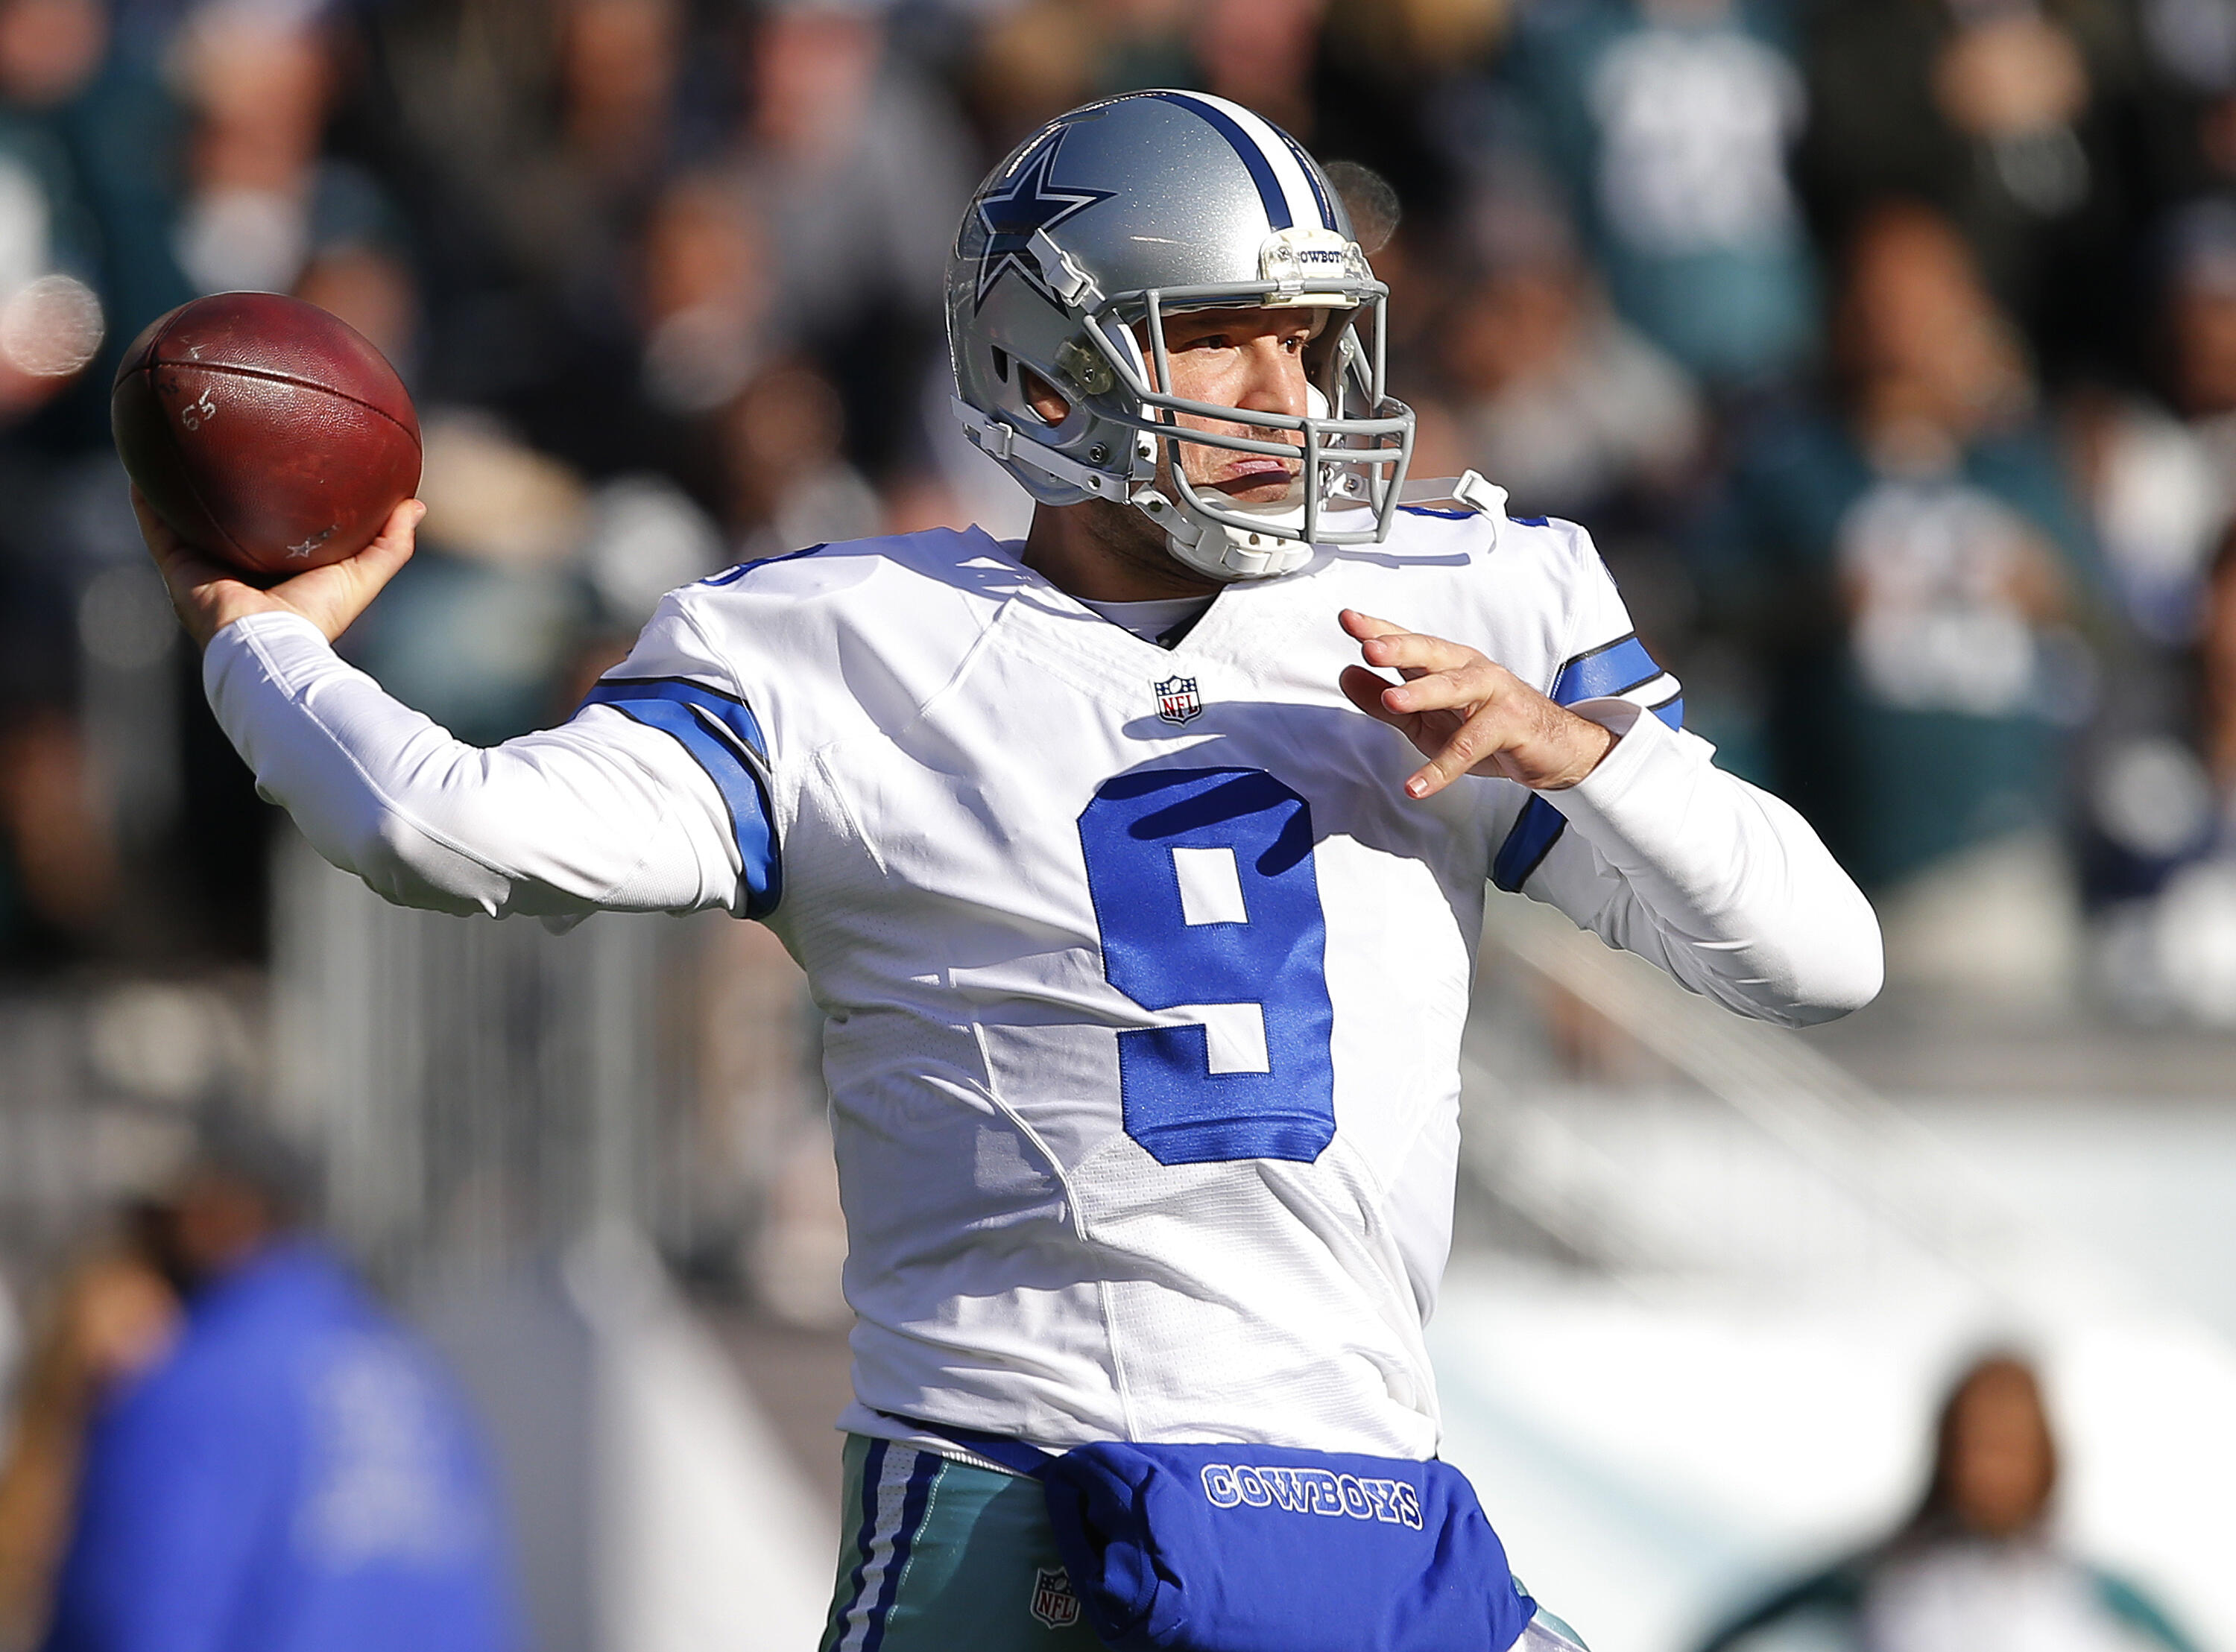 PHILADELPHIA, PA - JANUARY 01: Quarterback Tony Romo #9 of the Dallas Cowboys attempts a pass against the Philadelphia Eagles during the second quarter of a game at Lincoln Financial Field on January 1, 2017 in Philadelphia, Pennsylvania. (Photo by Rich S